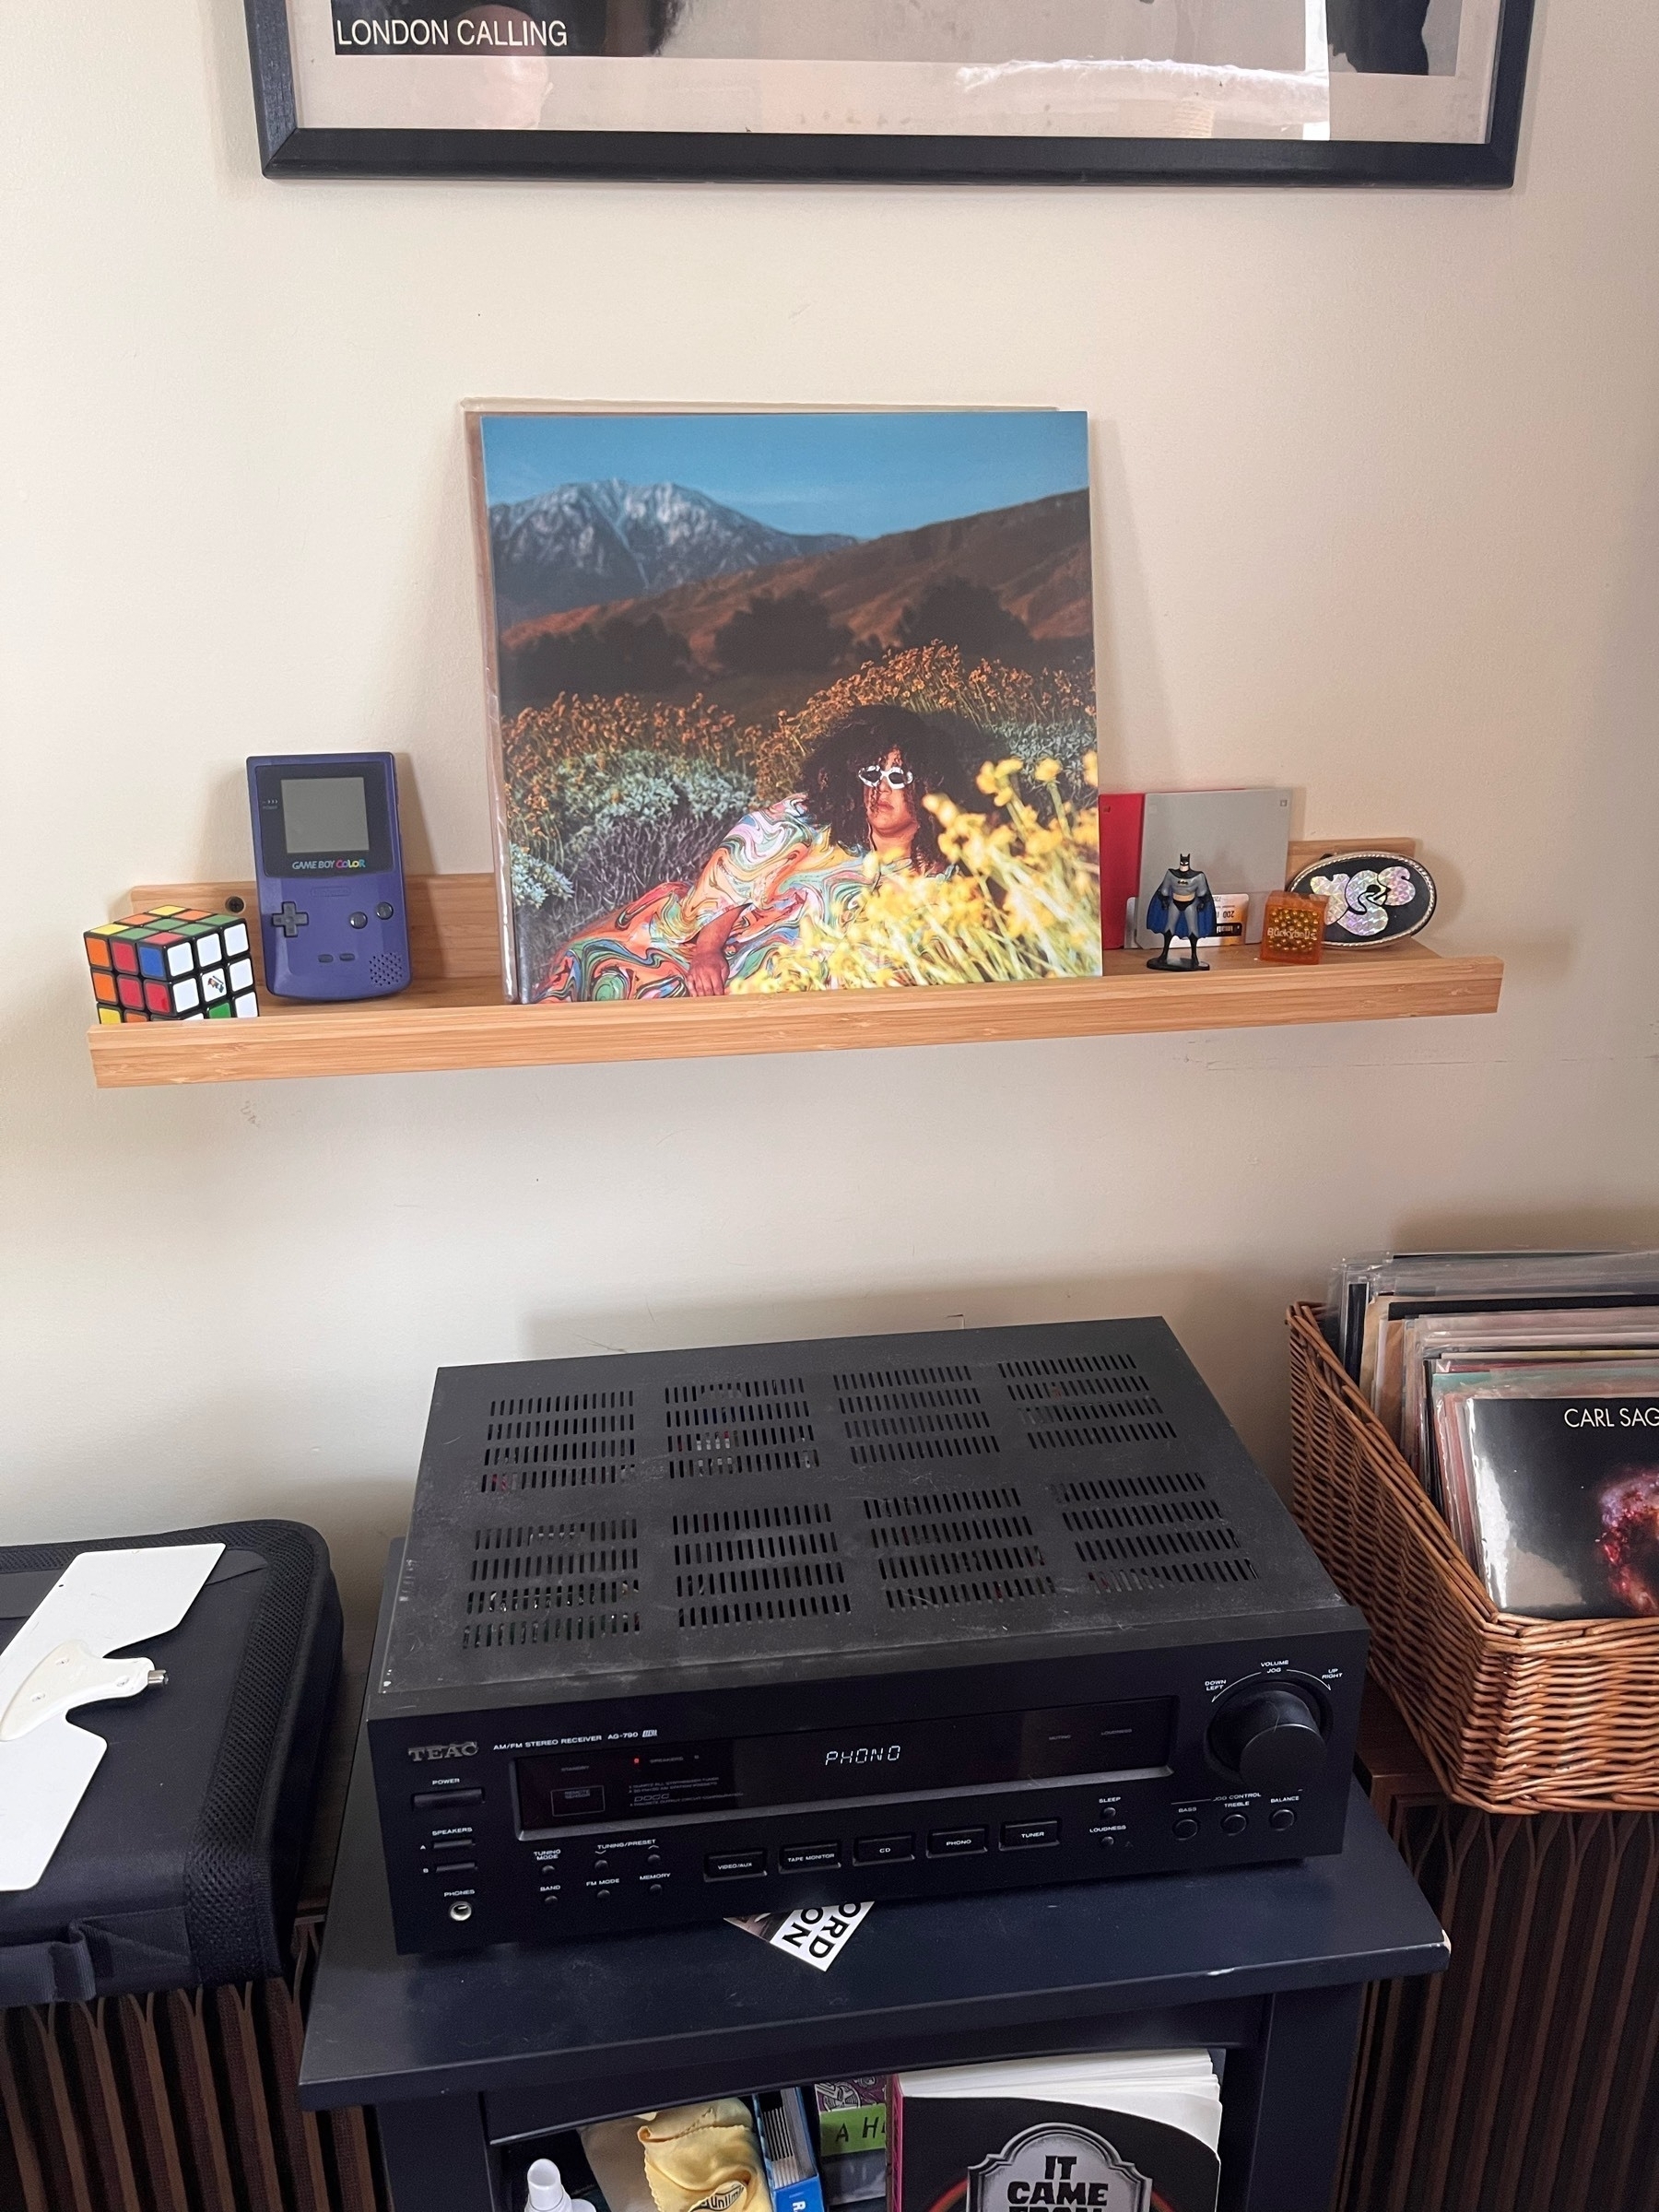 Britney Howard's What Now vinyl album cover, which depicts a lush flowery field and a cool Brittney, a full black woman wearing sunglasses and sporting a big Afro. She wears a flowing colorful dress. The cover is on a display shelf along with a Gameboy and a Batman figure above a stereo. 